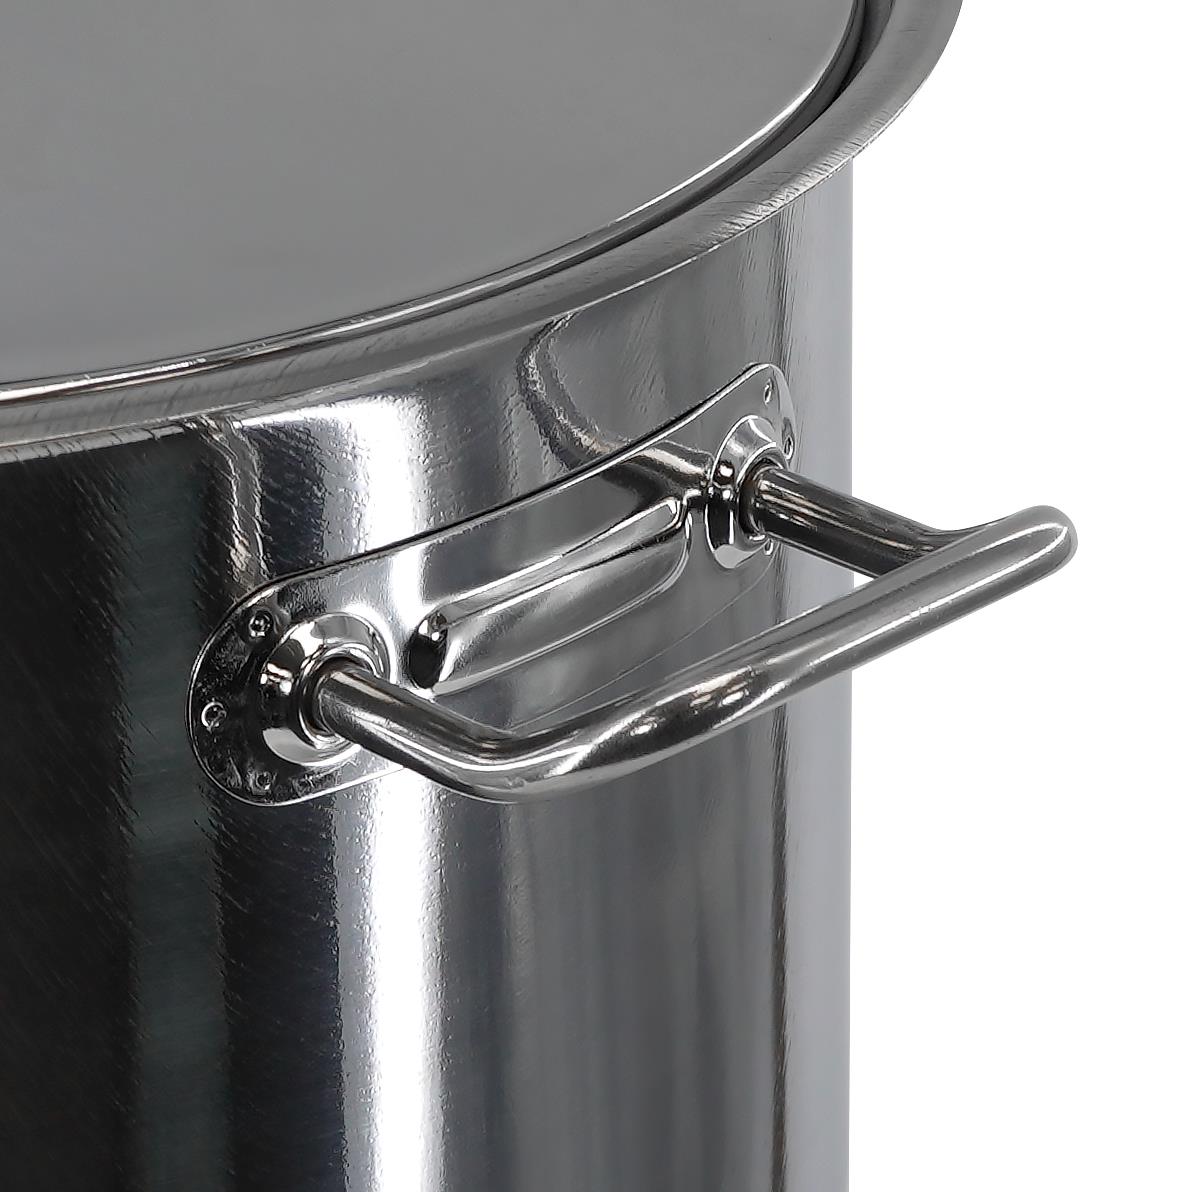 Arian Gastro Stock Pot - 21 Litre by GEEZY - UKBuyZone